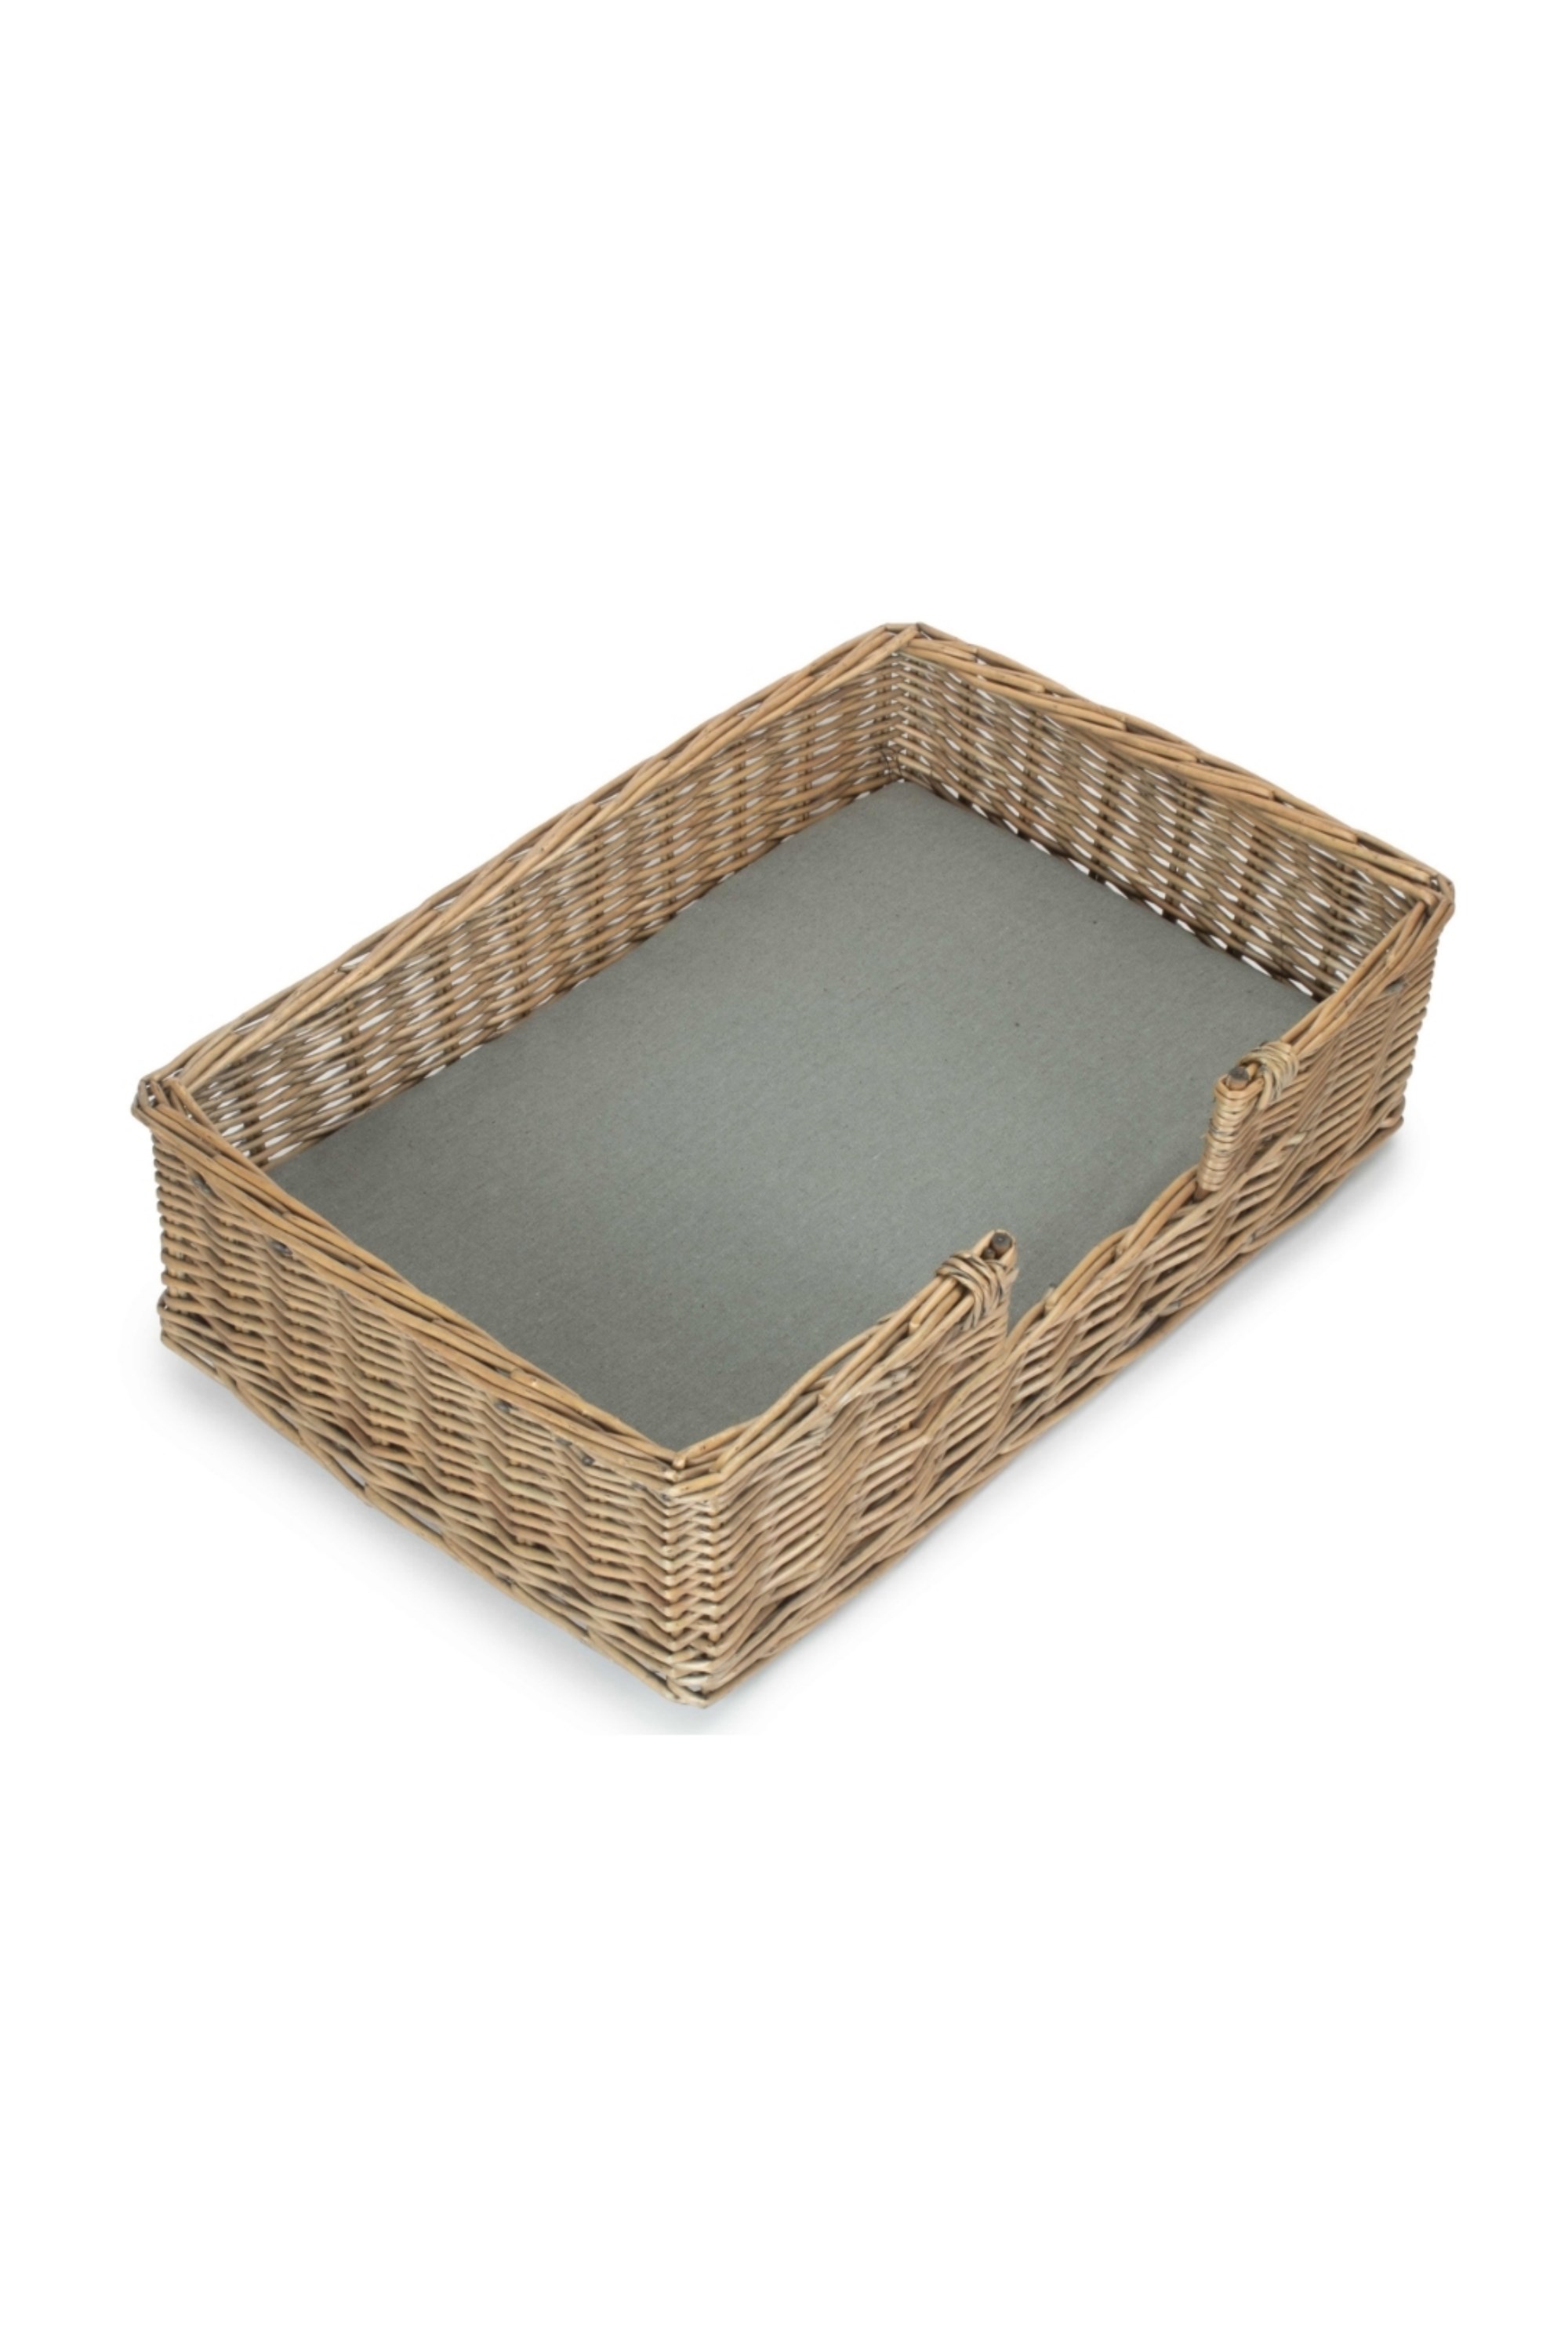 Wicker Dog Bed with Cushion -